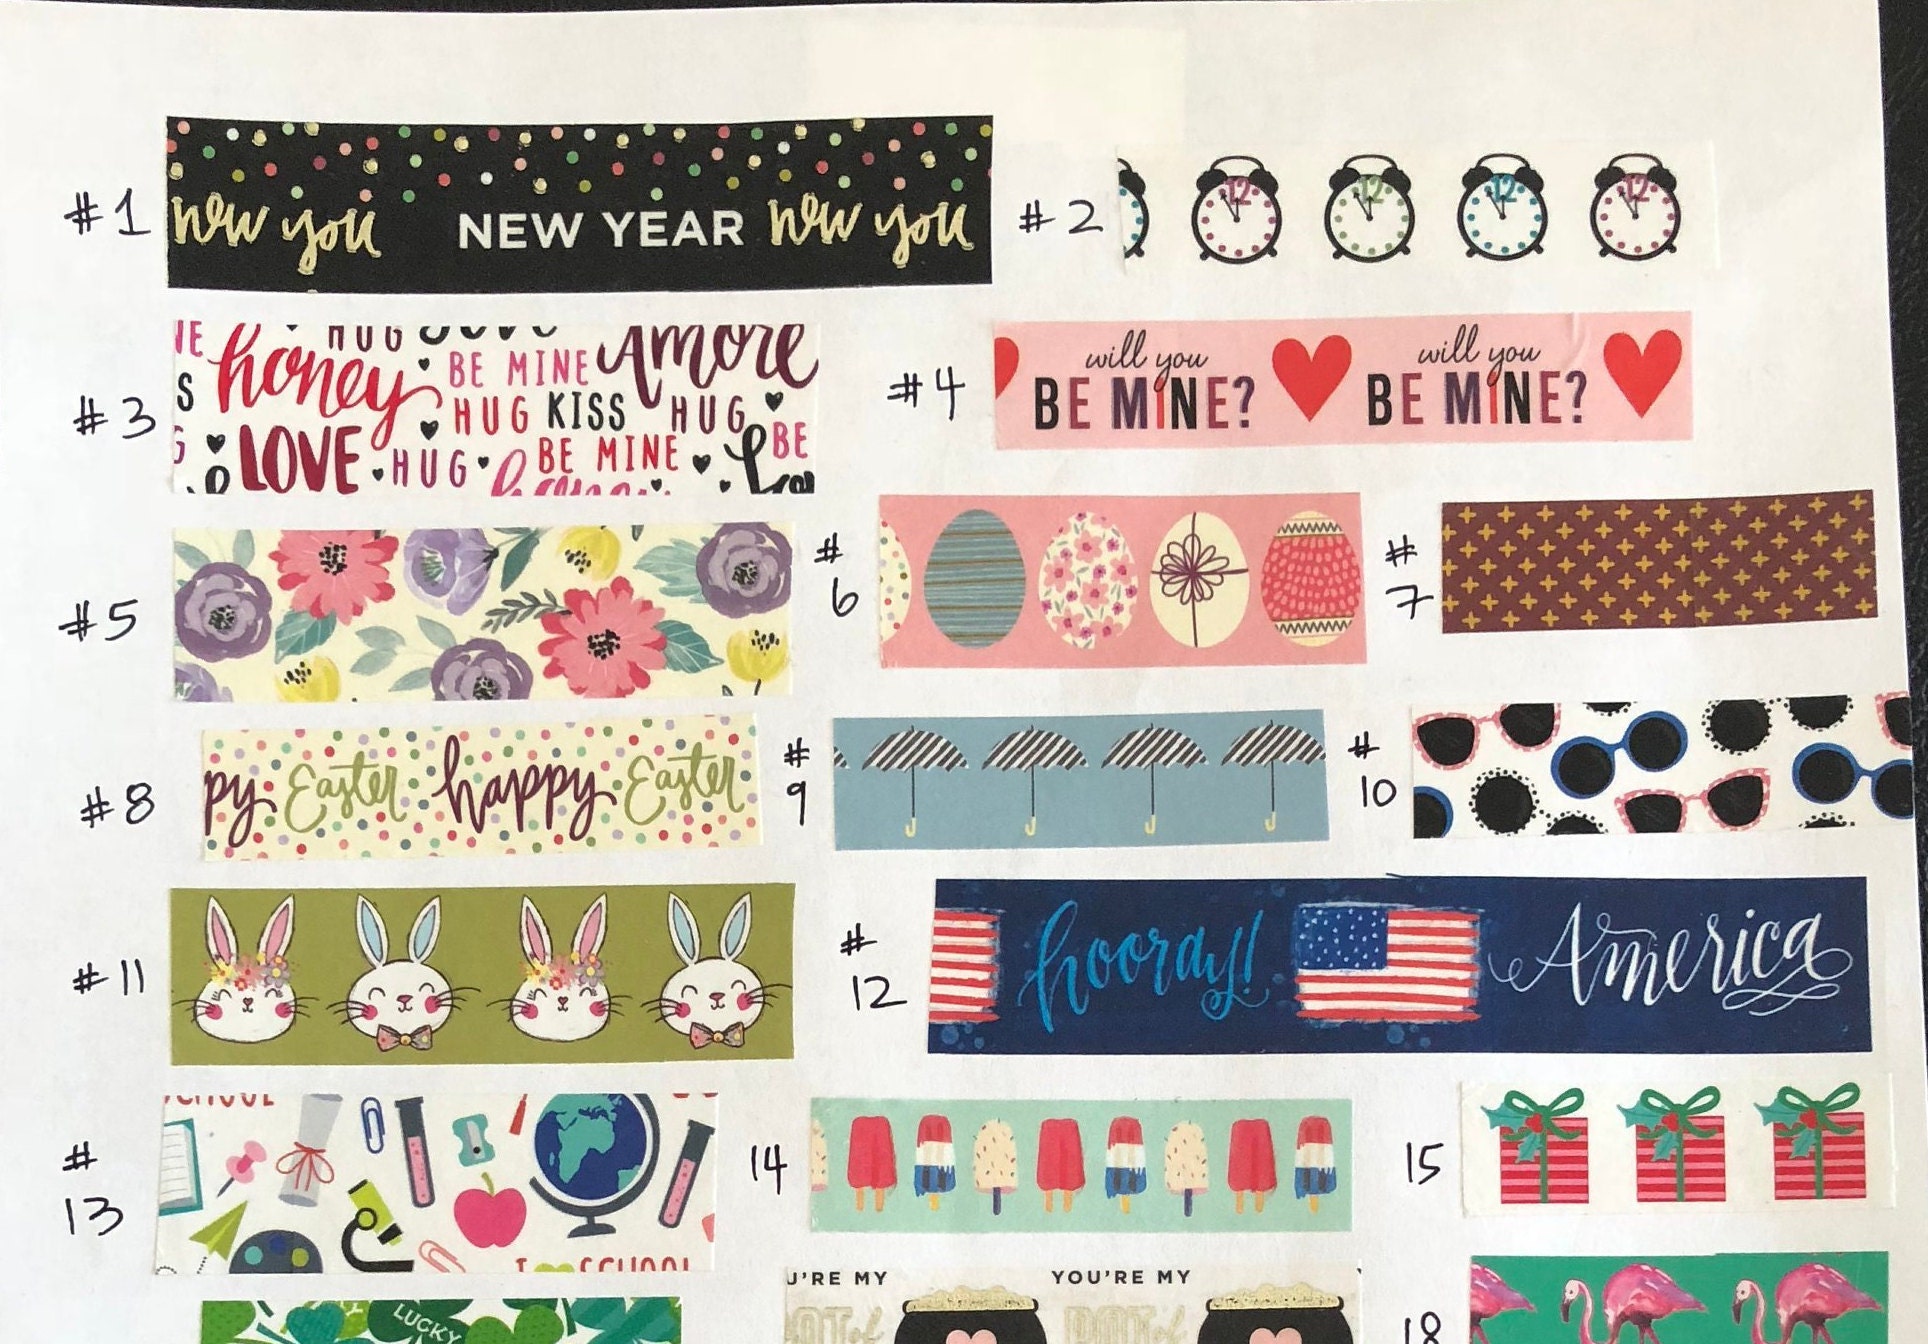 WS42B: Hello Kitty Washi Tape Samples, 18 Inches, Hawaii, Floral, Washi,  Planner Decorations, Scrapbooking 